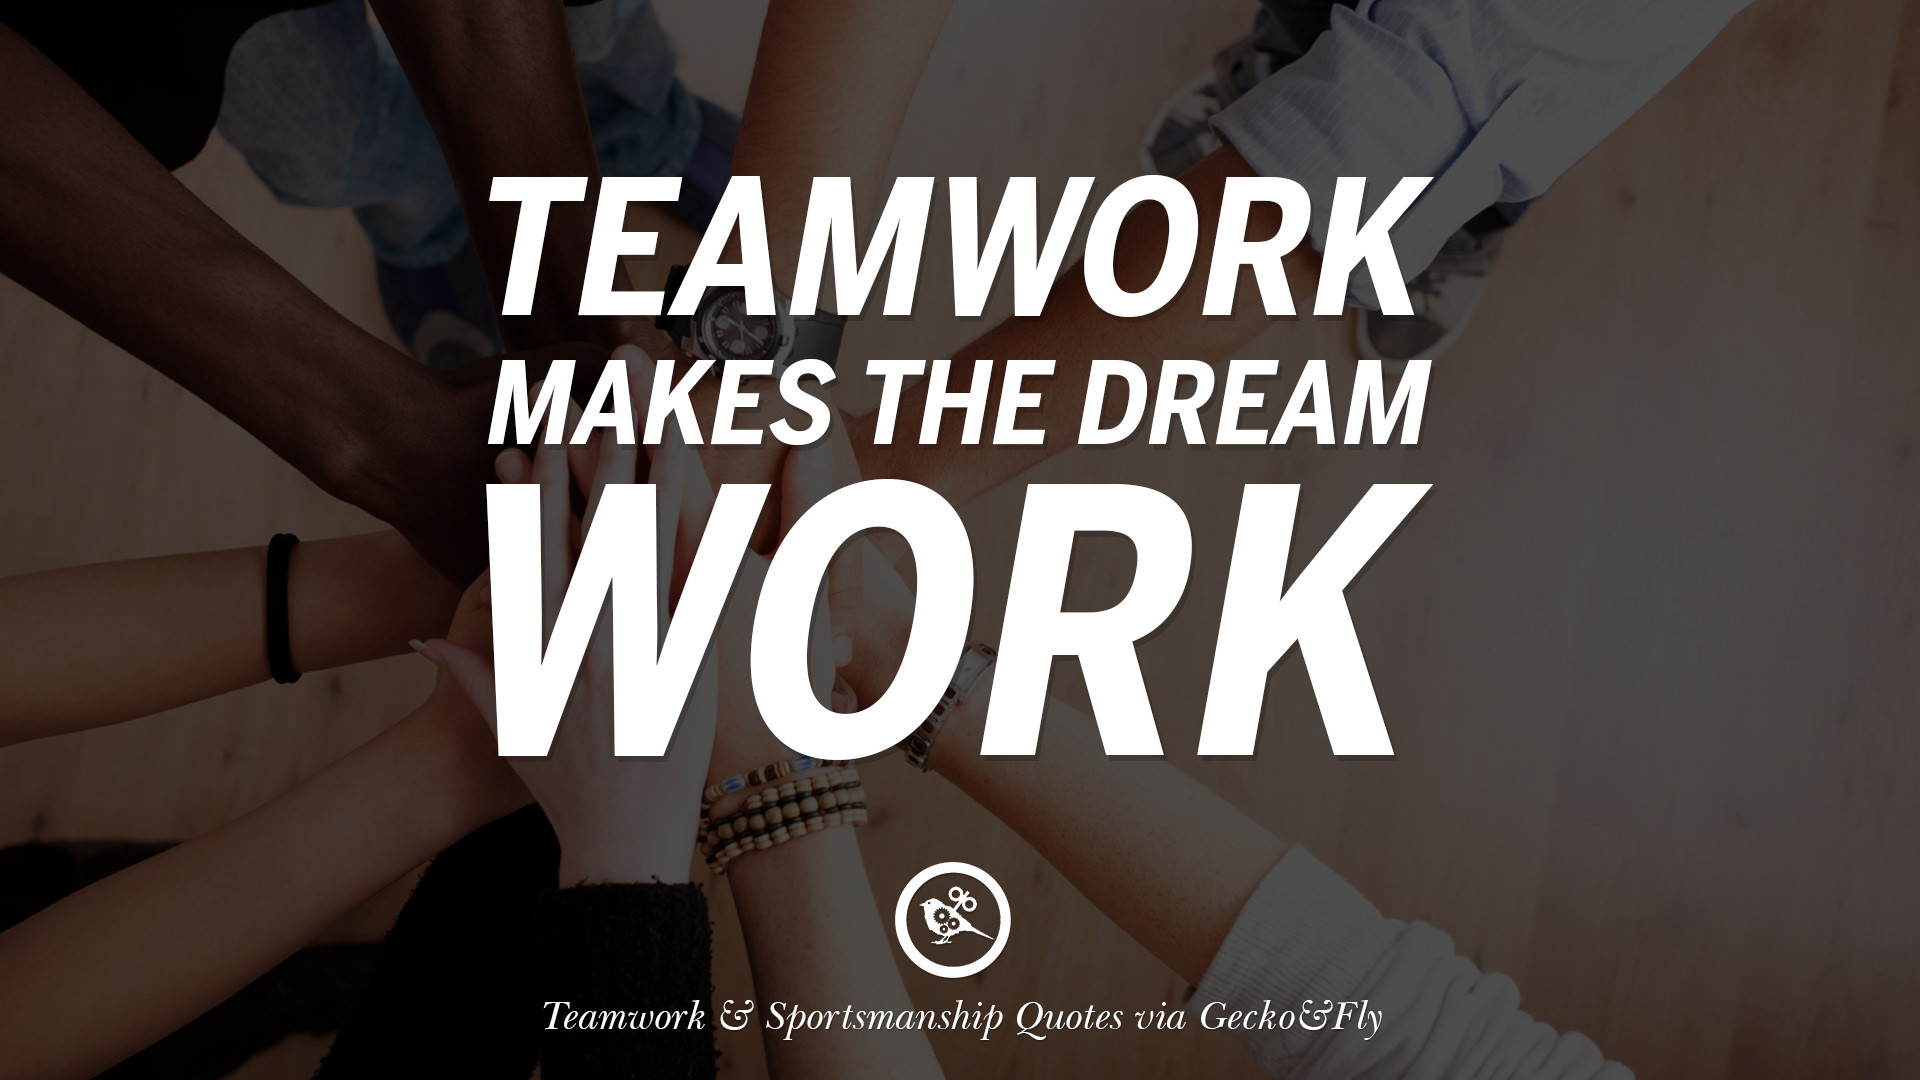 Teamwork Quotes Inspirational
 50 Inspirational Quotes About Teamwork And Sportsmanship